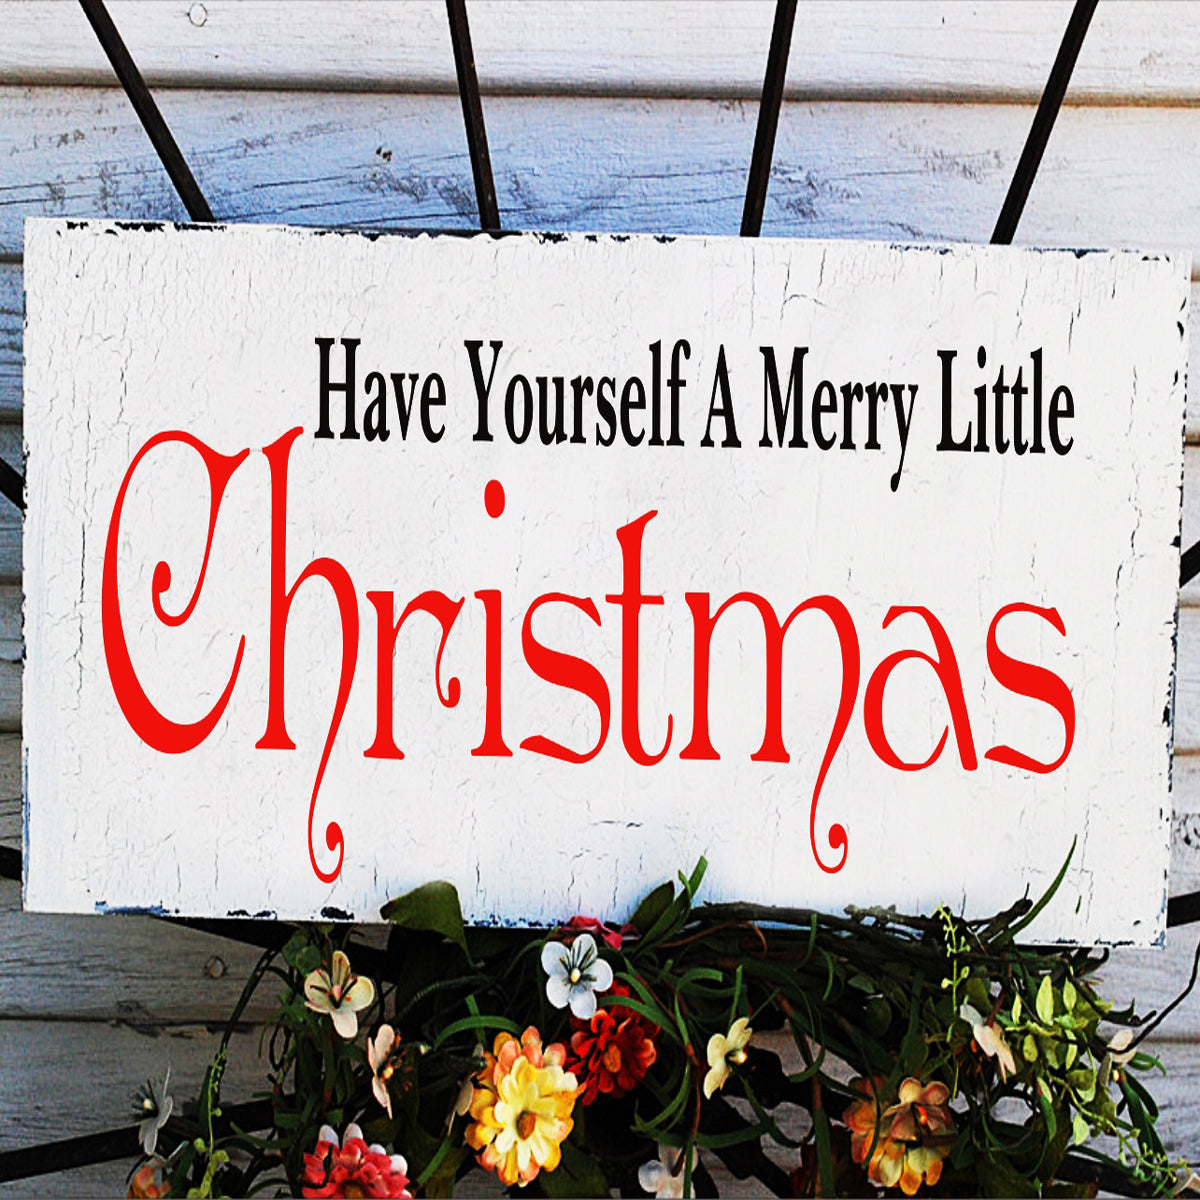 Have Yourself A Merry Little Christmas Stencil - Superior Stencils